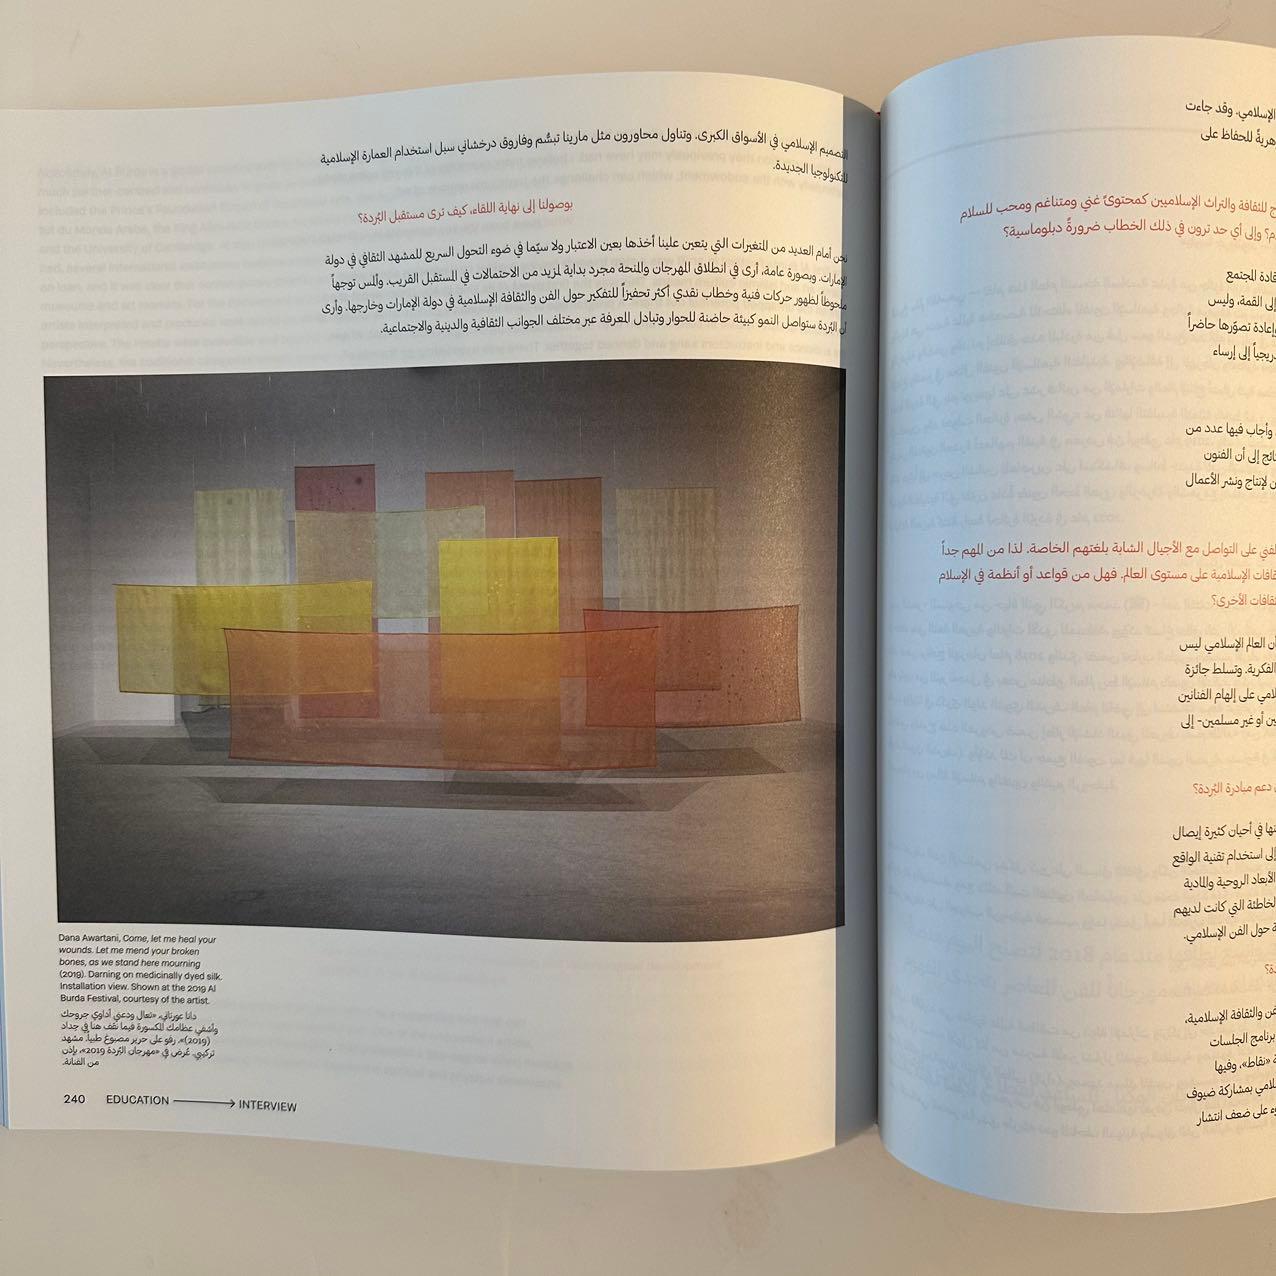 1st edition published by ADMAF - Abu Dhabi Music & Arts Foundation. Hardcover with a beautiful crimson red slipcase. With English and Arabic text woven throughout. 

This comprehensive tome offers a reflection, through an artistic prism, charting